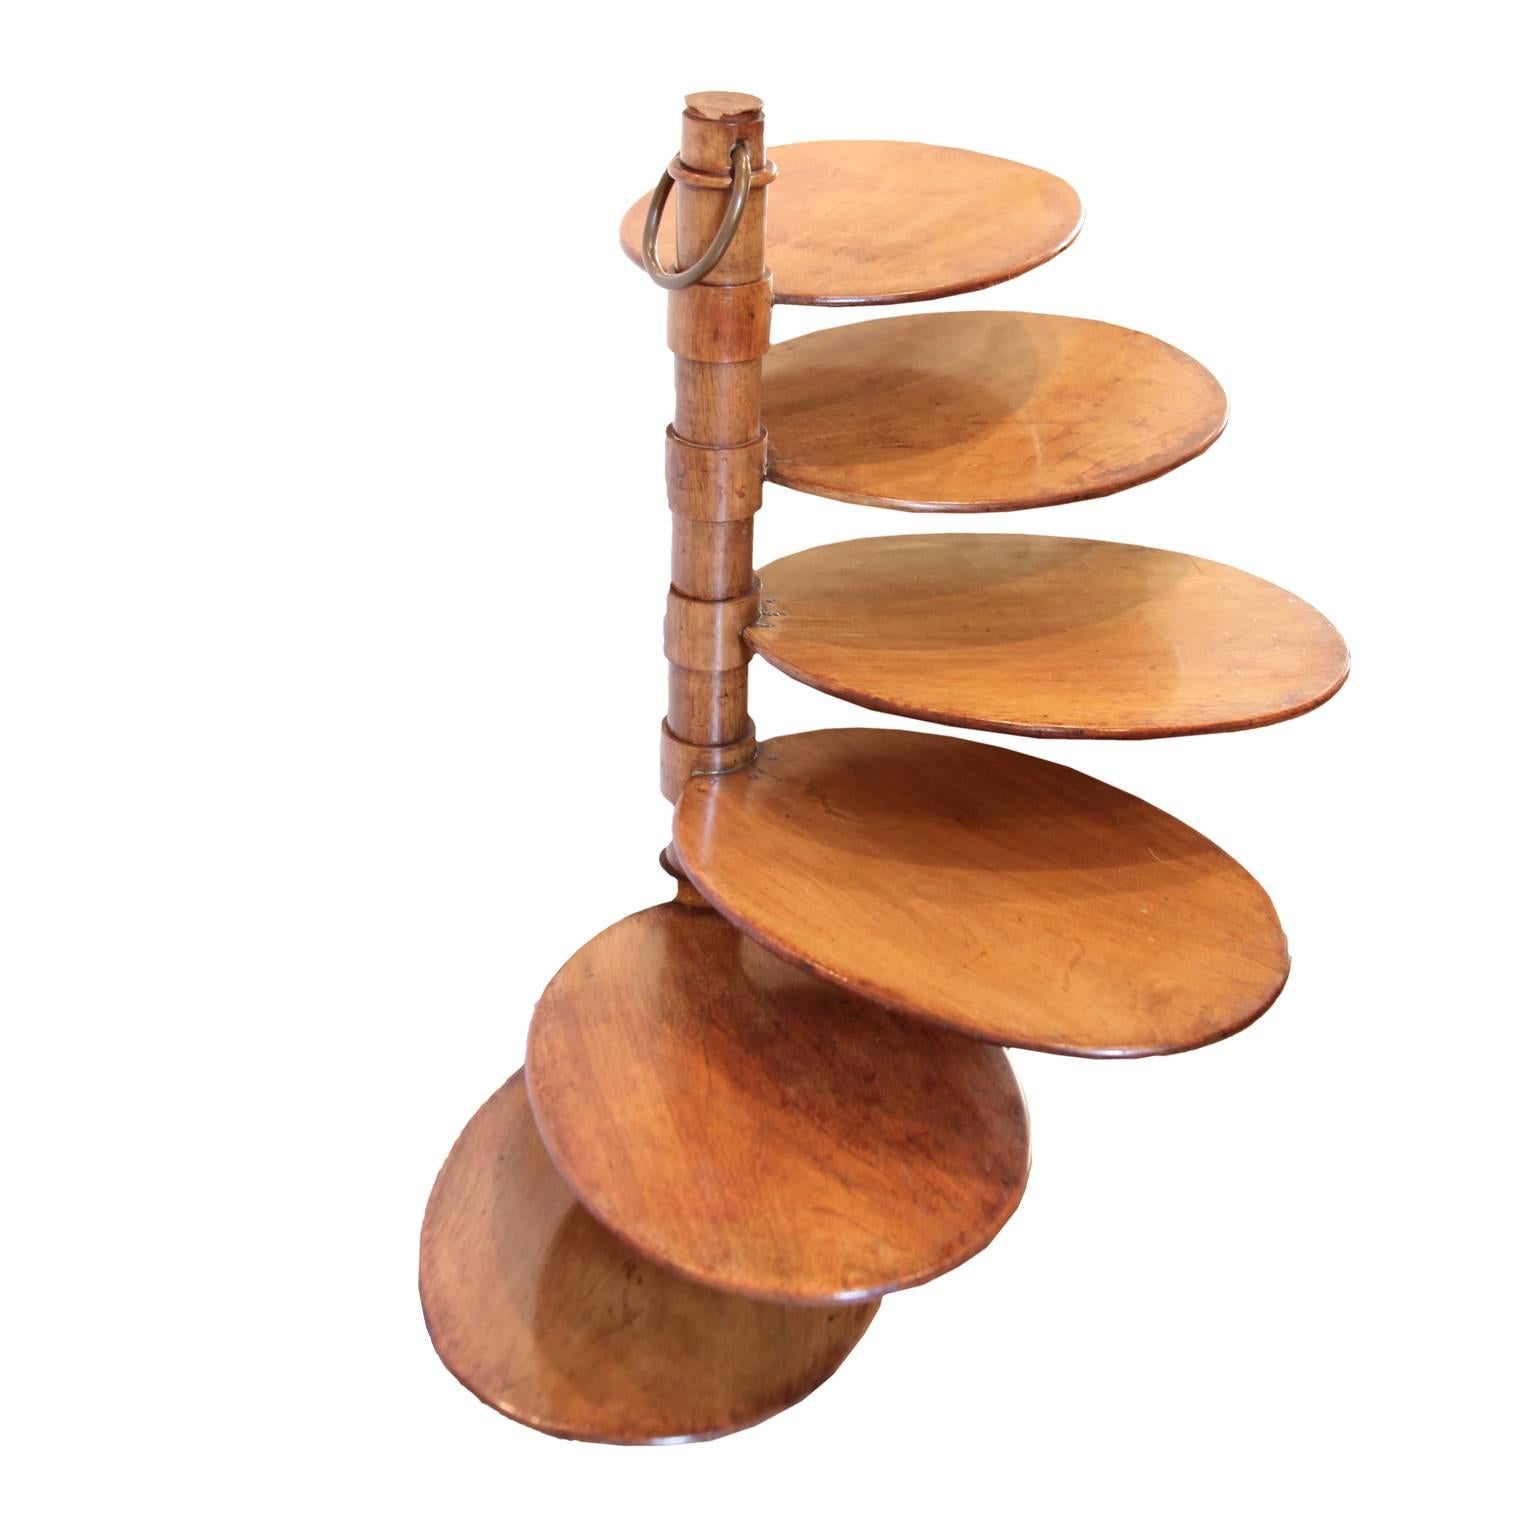 Probably the only piece of furniture with a modular structure designed by Portaluppi: the tray holder is made of six cylindrical elements that turn on a central elliptic linchpin. Also called “i petali” (the petals) for the look it has, the tray